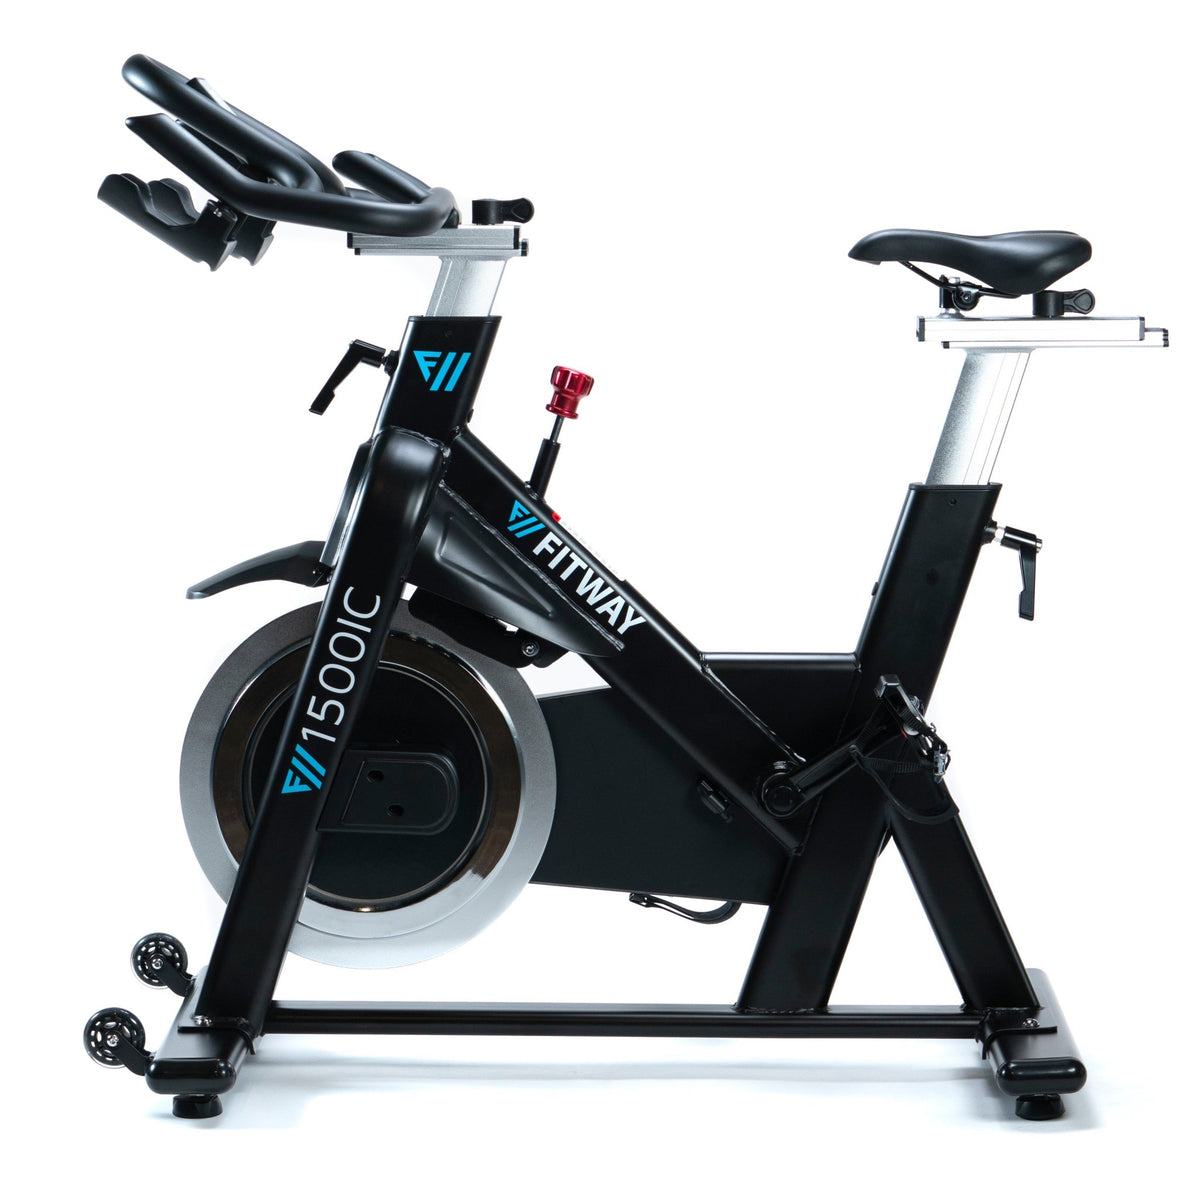 FitWay Equip. 1500IC Indoor Cycle - Angle 2